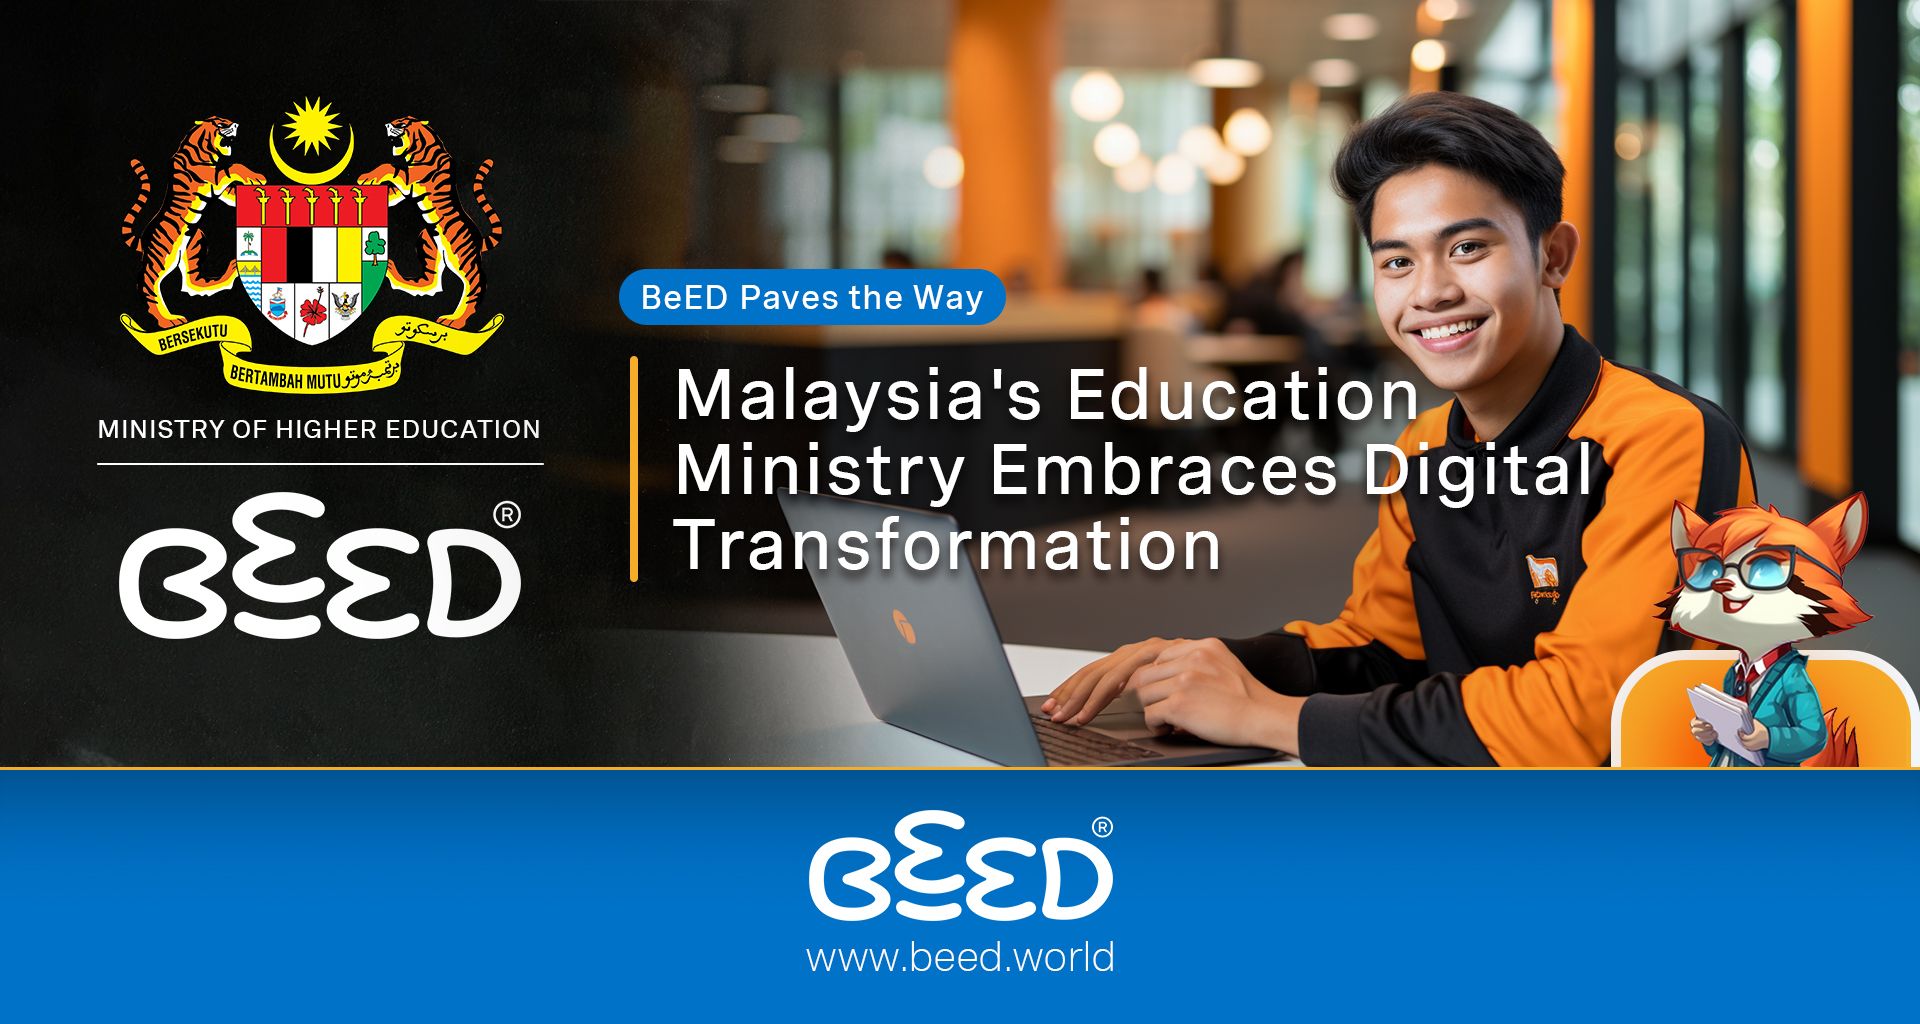 Malaysia's Education Ministry Embraces Digital
Transformation, BeED Paves the Way